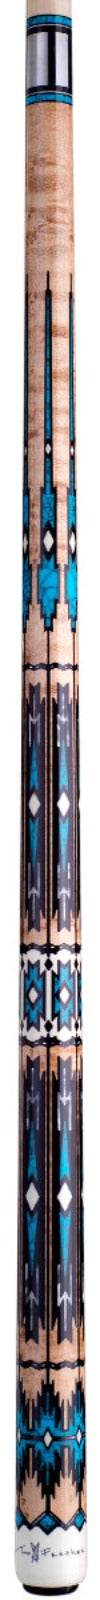 Viking White Wolf - comes with Vikore Shaft Pool Cue